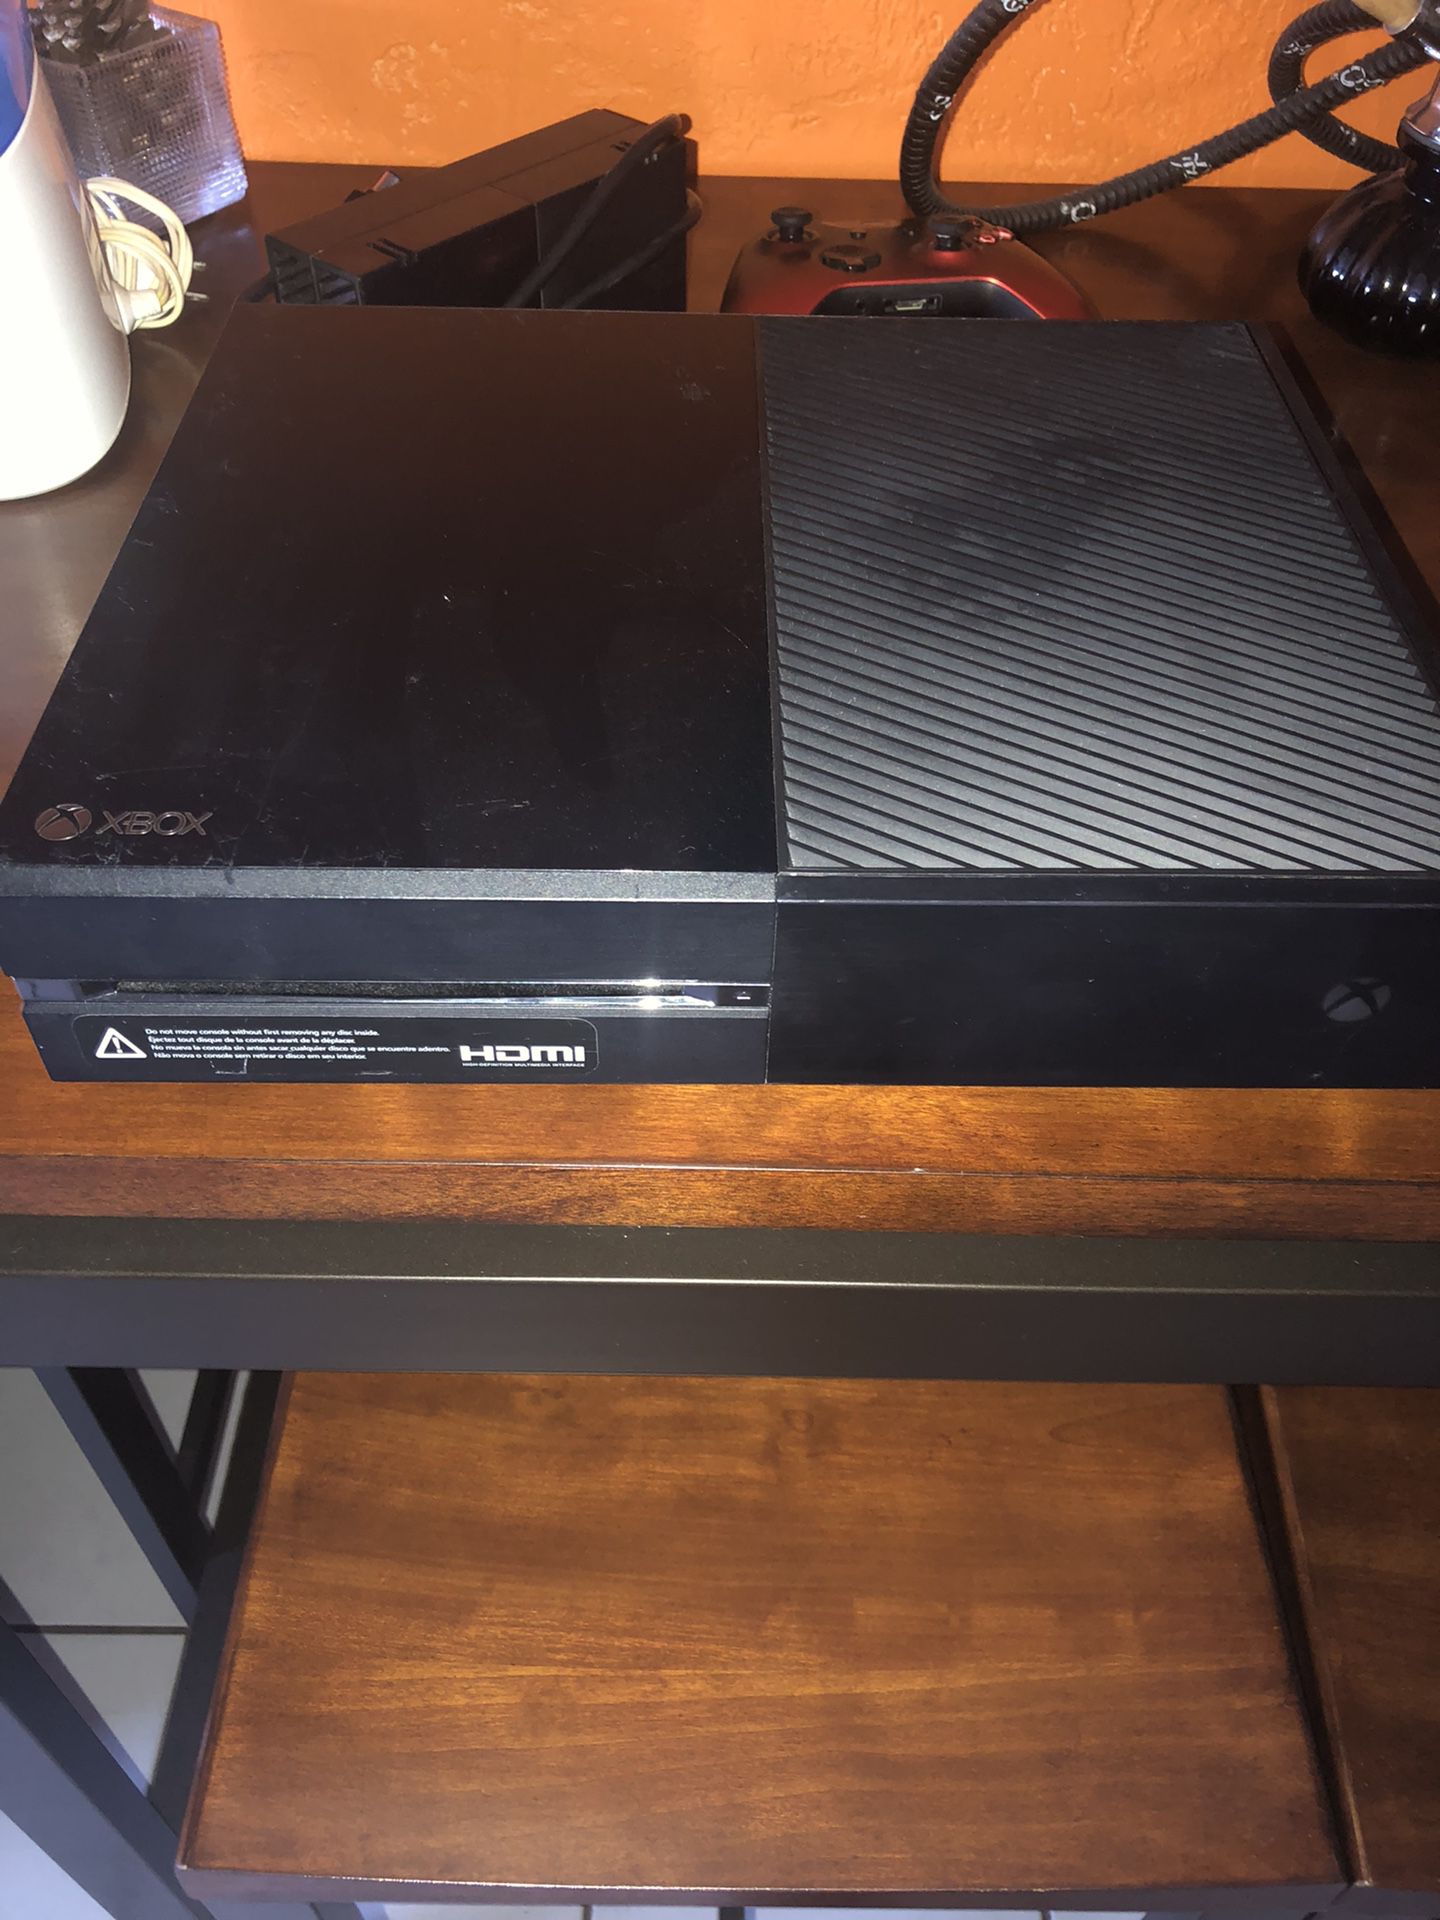 XboxOne/500GB with New red remote-control💯